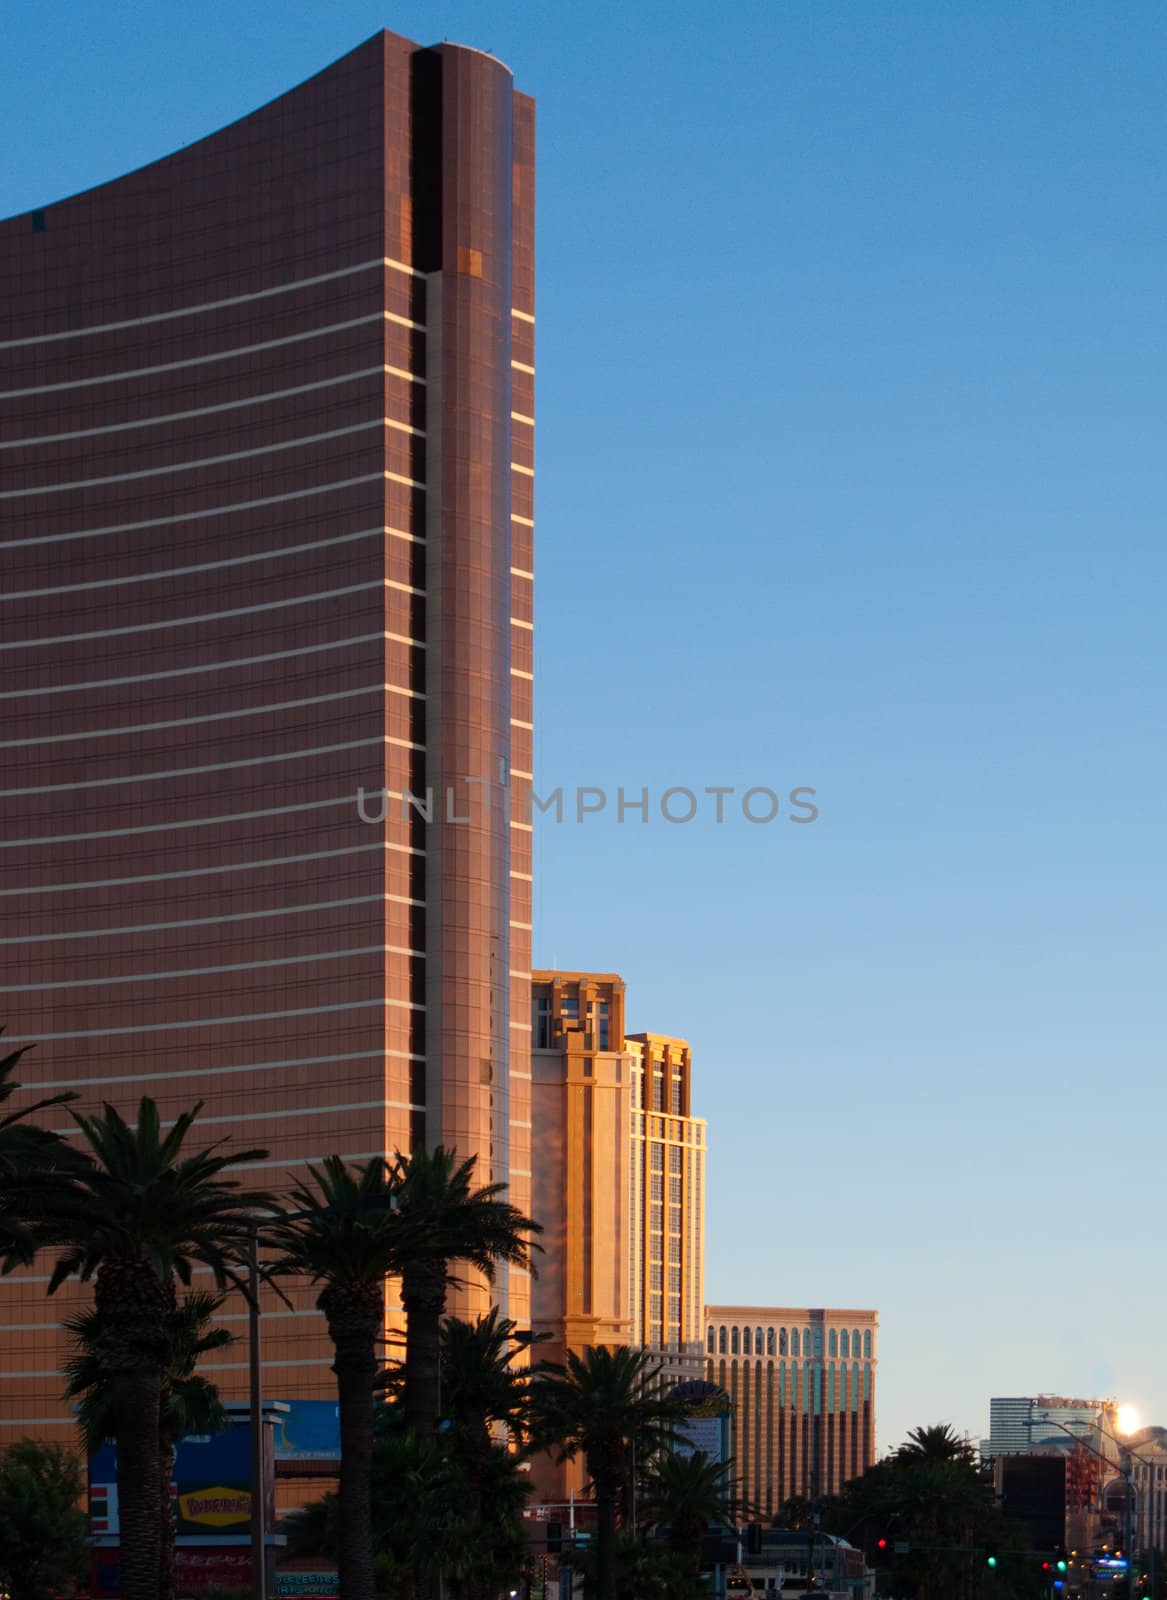 Buildings on the Las Vegas Strip in the afternoon